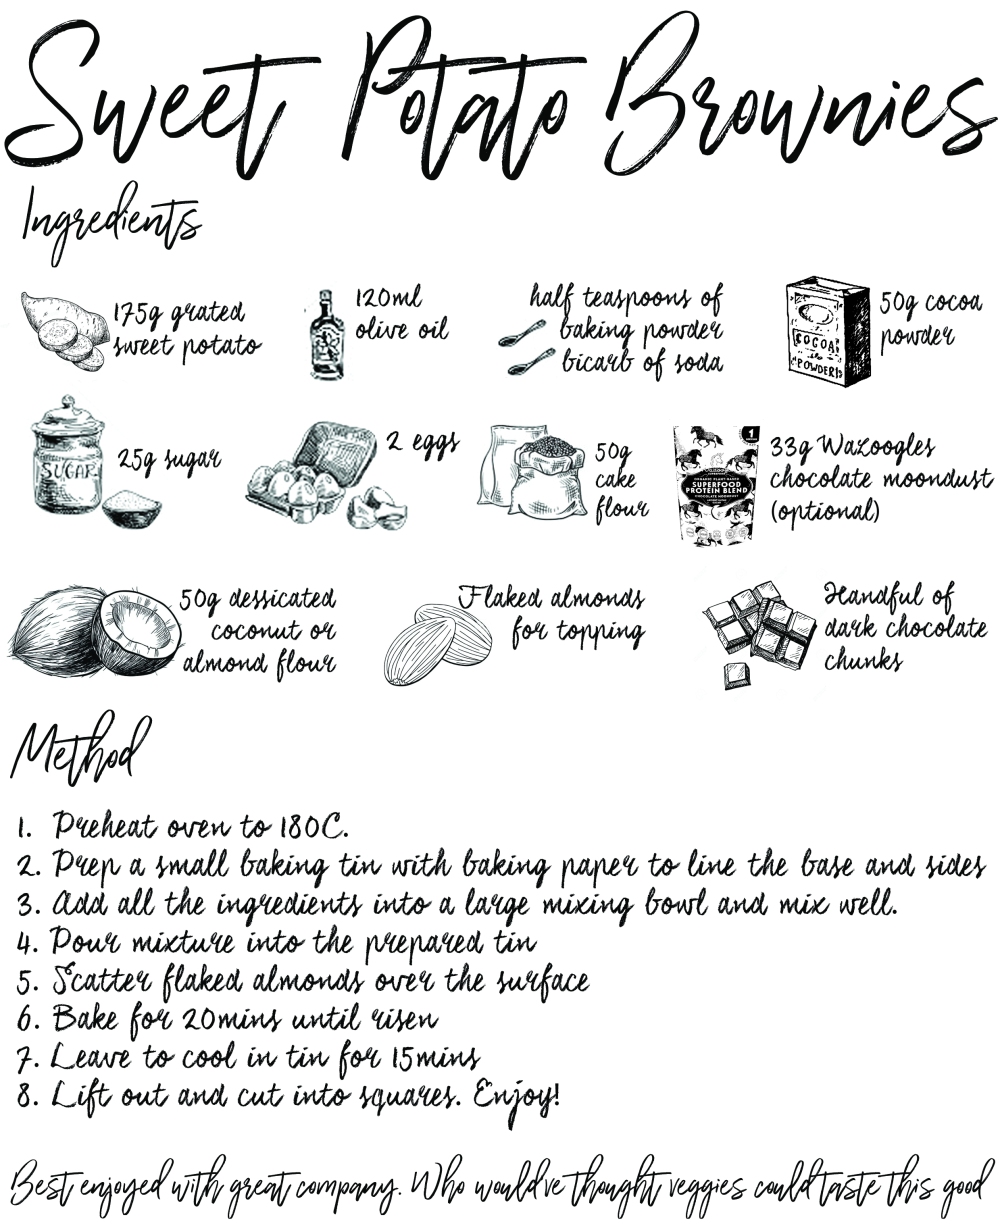 small things that count sweet potato brownies recipe